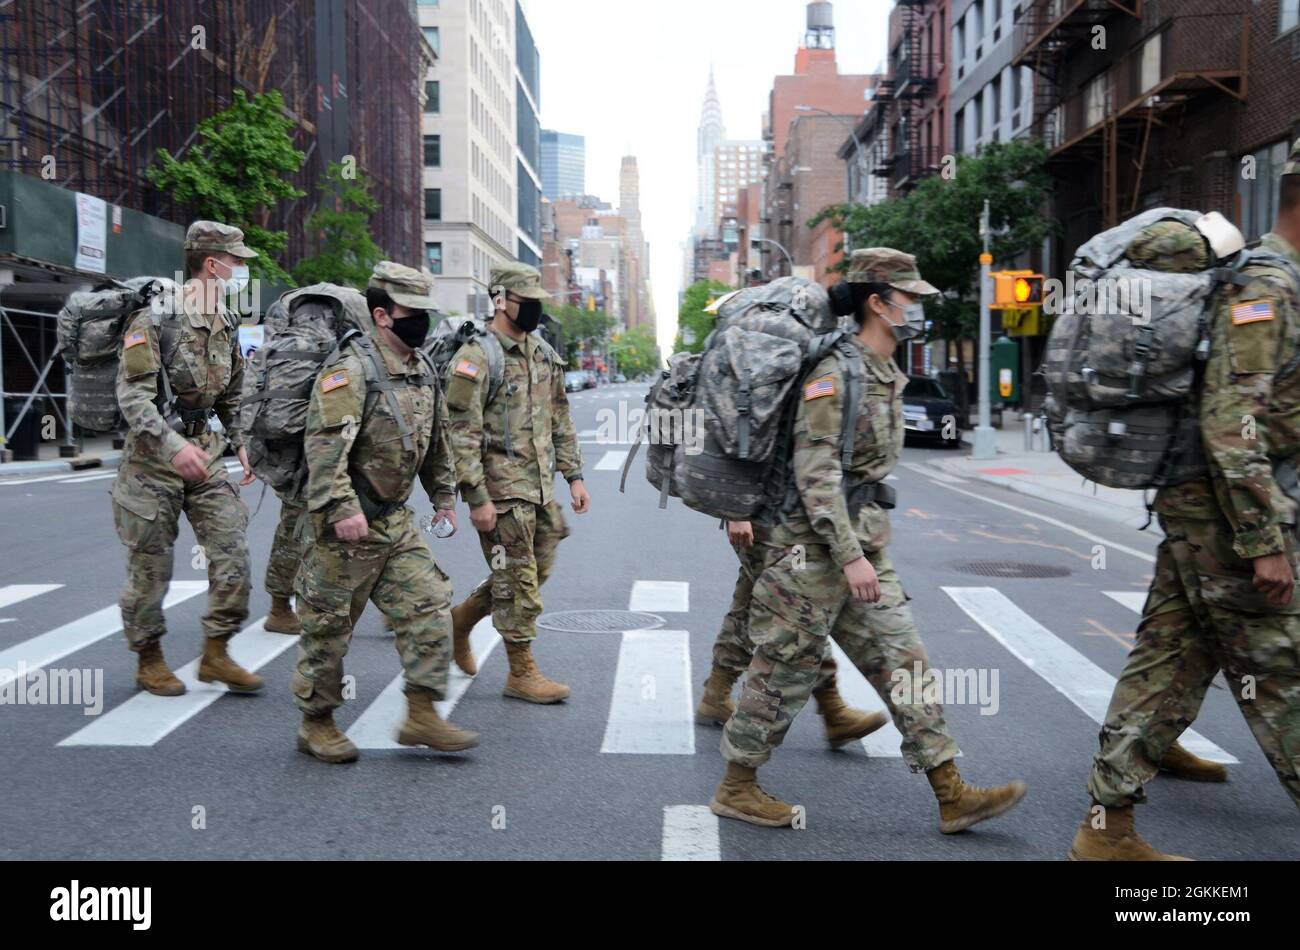 With the Chrysler building dominating the skyline, New York Army National Guard medics assigned to the Headquarters Company of the 1st Battalion, 69th Infantry Regiment conduct a six mile ruck march through Manhattan during the early morning hours on May 16, 2021. Thirty-six medics took part in the march as a train up for a required ruck march during annual training. U.S. A Stock Photo